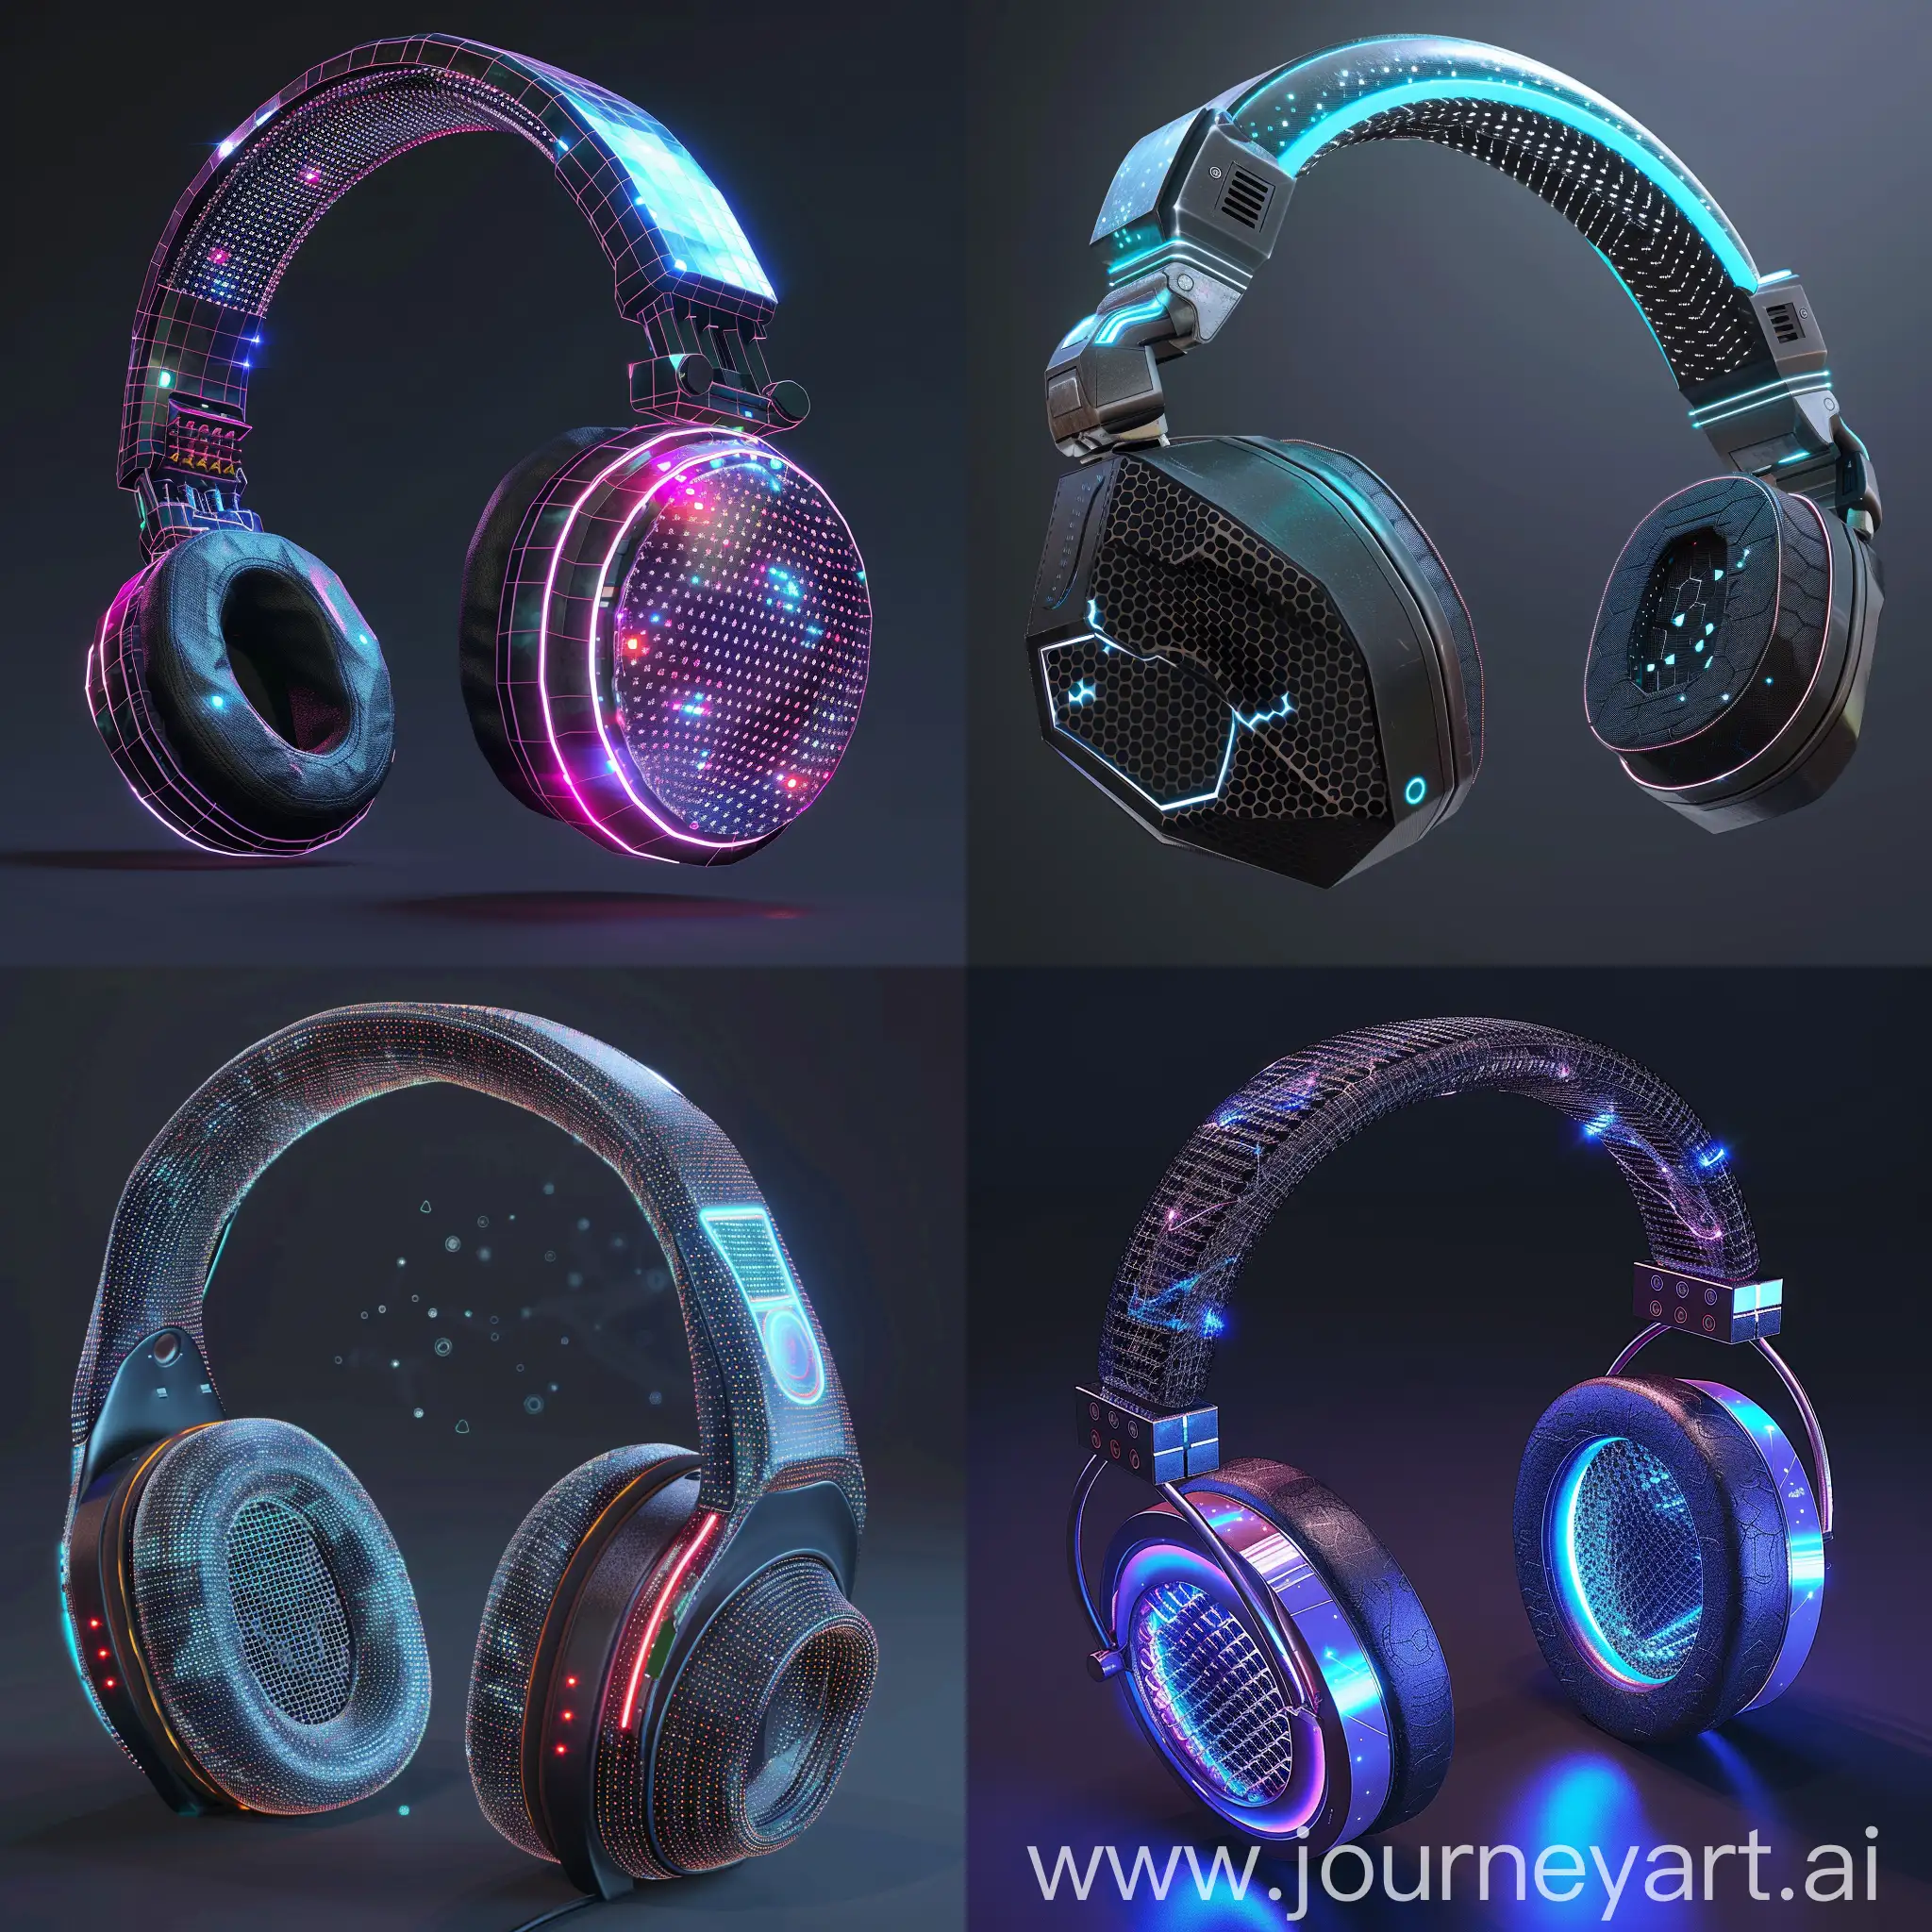 Futuristic-PC-Headphones-with-Neural-Interface-Integration-and-Bioluminescent-Aesthetics